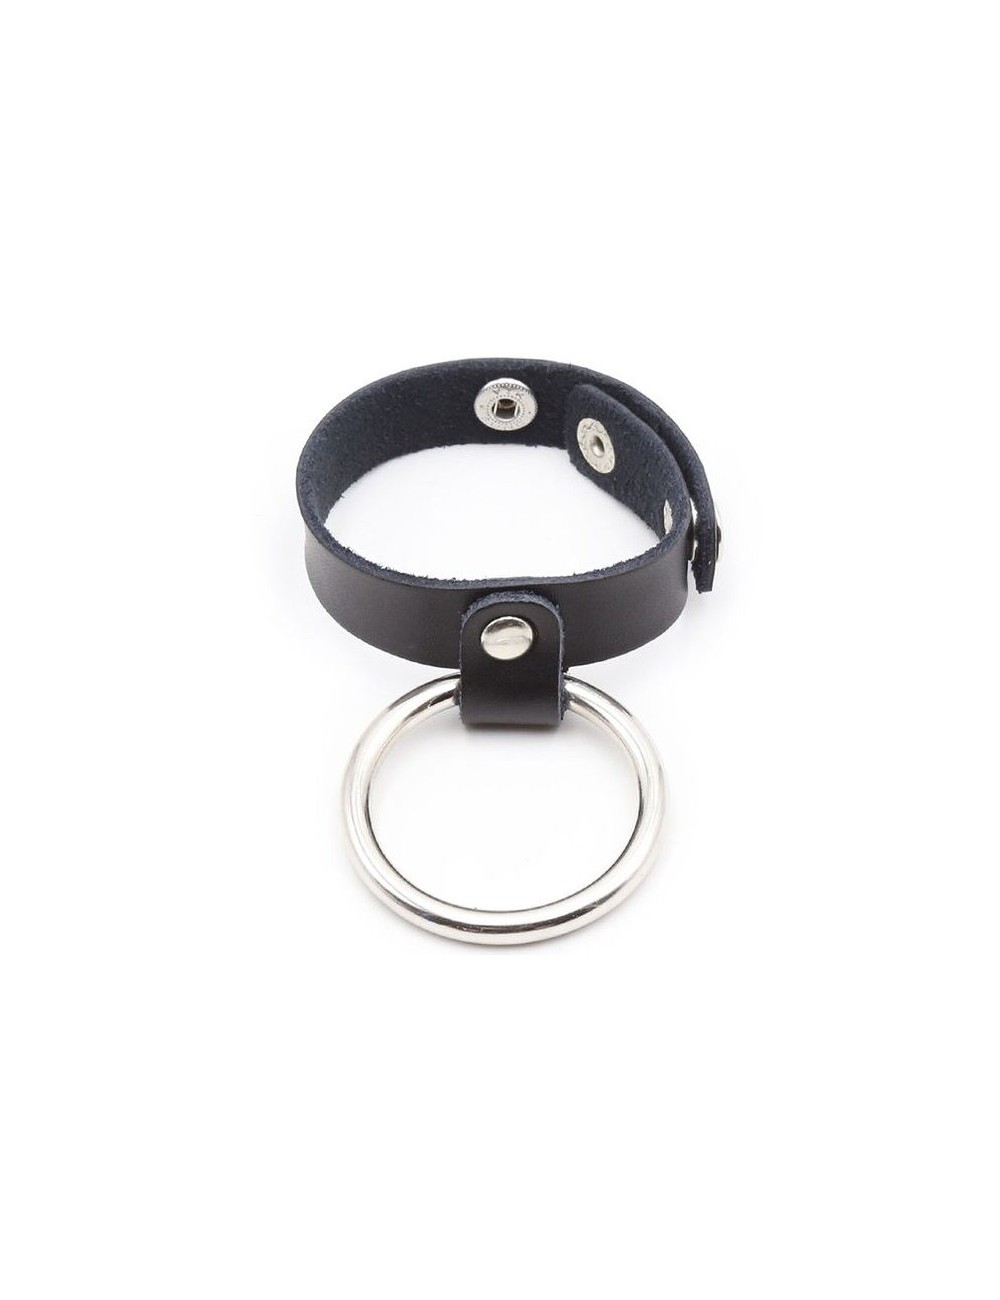 OHMAMA METAL COCK RING WITH BALL DIVIDER